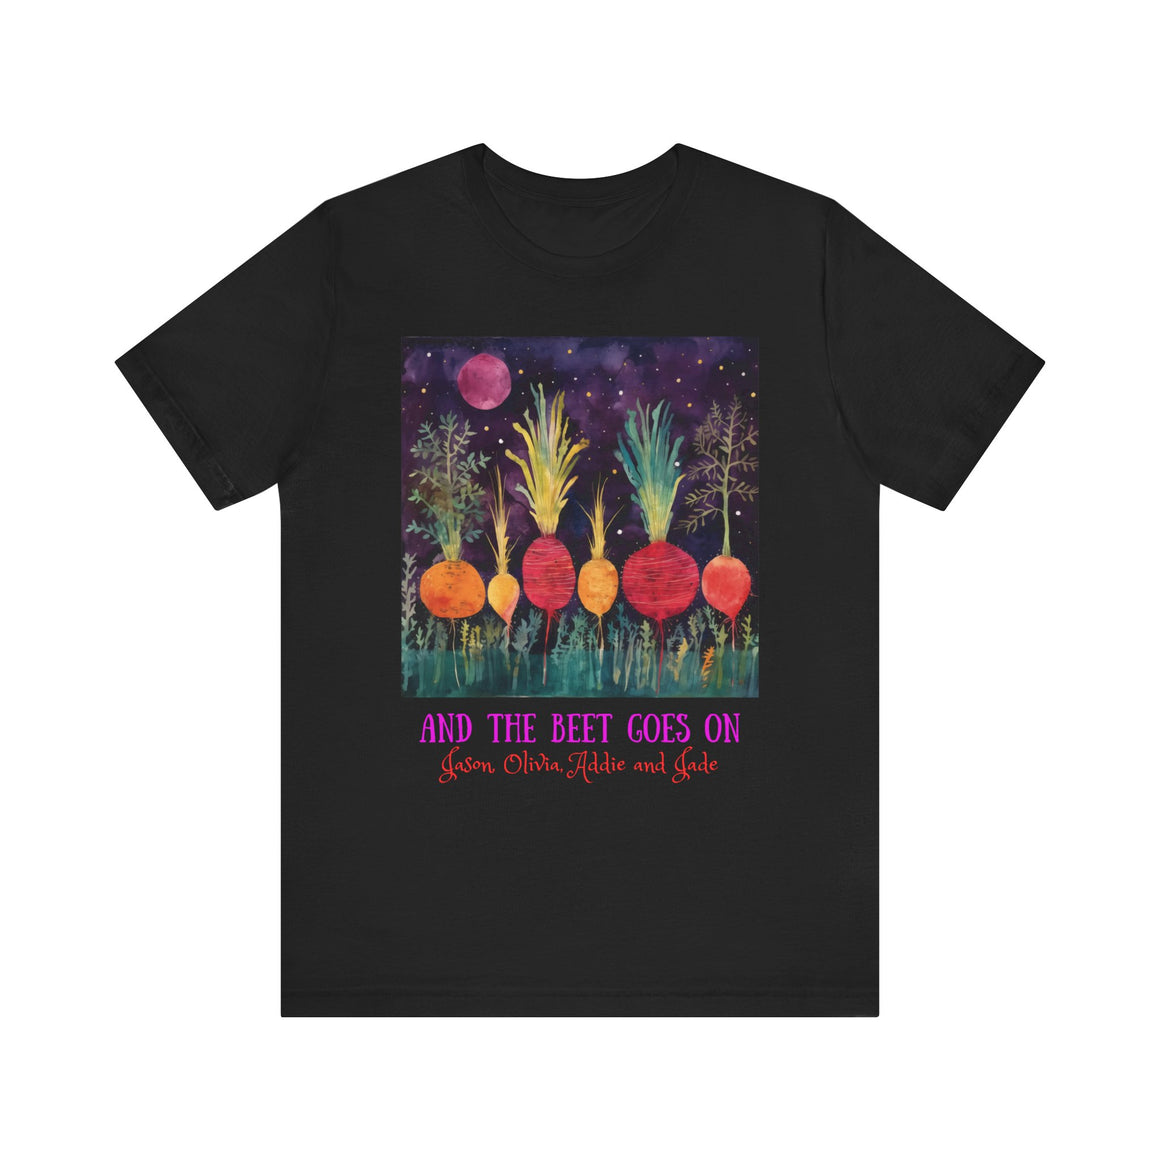 The Beet Goes On - Personalization Option  - Unisex Jersey Short Sleeve Tee